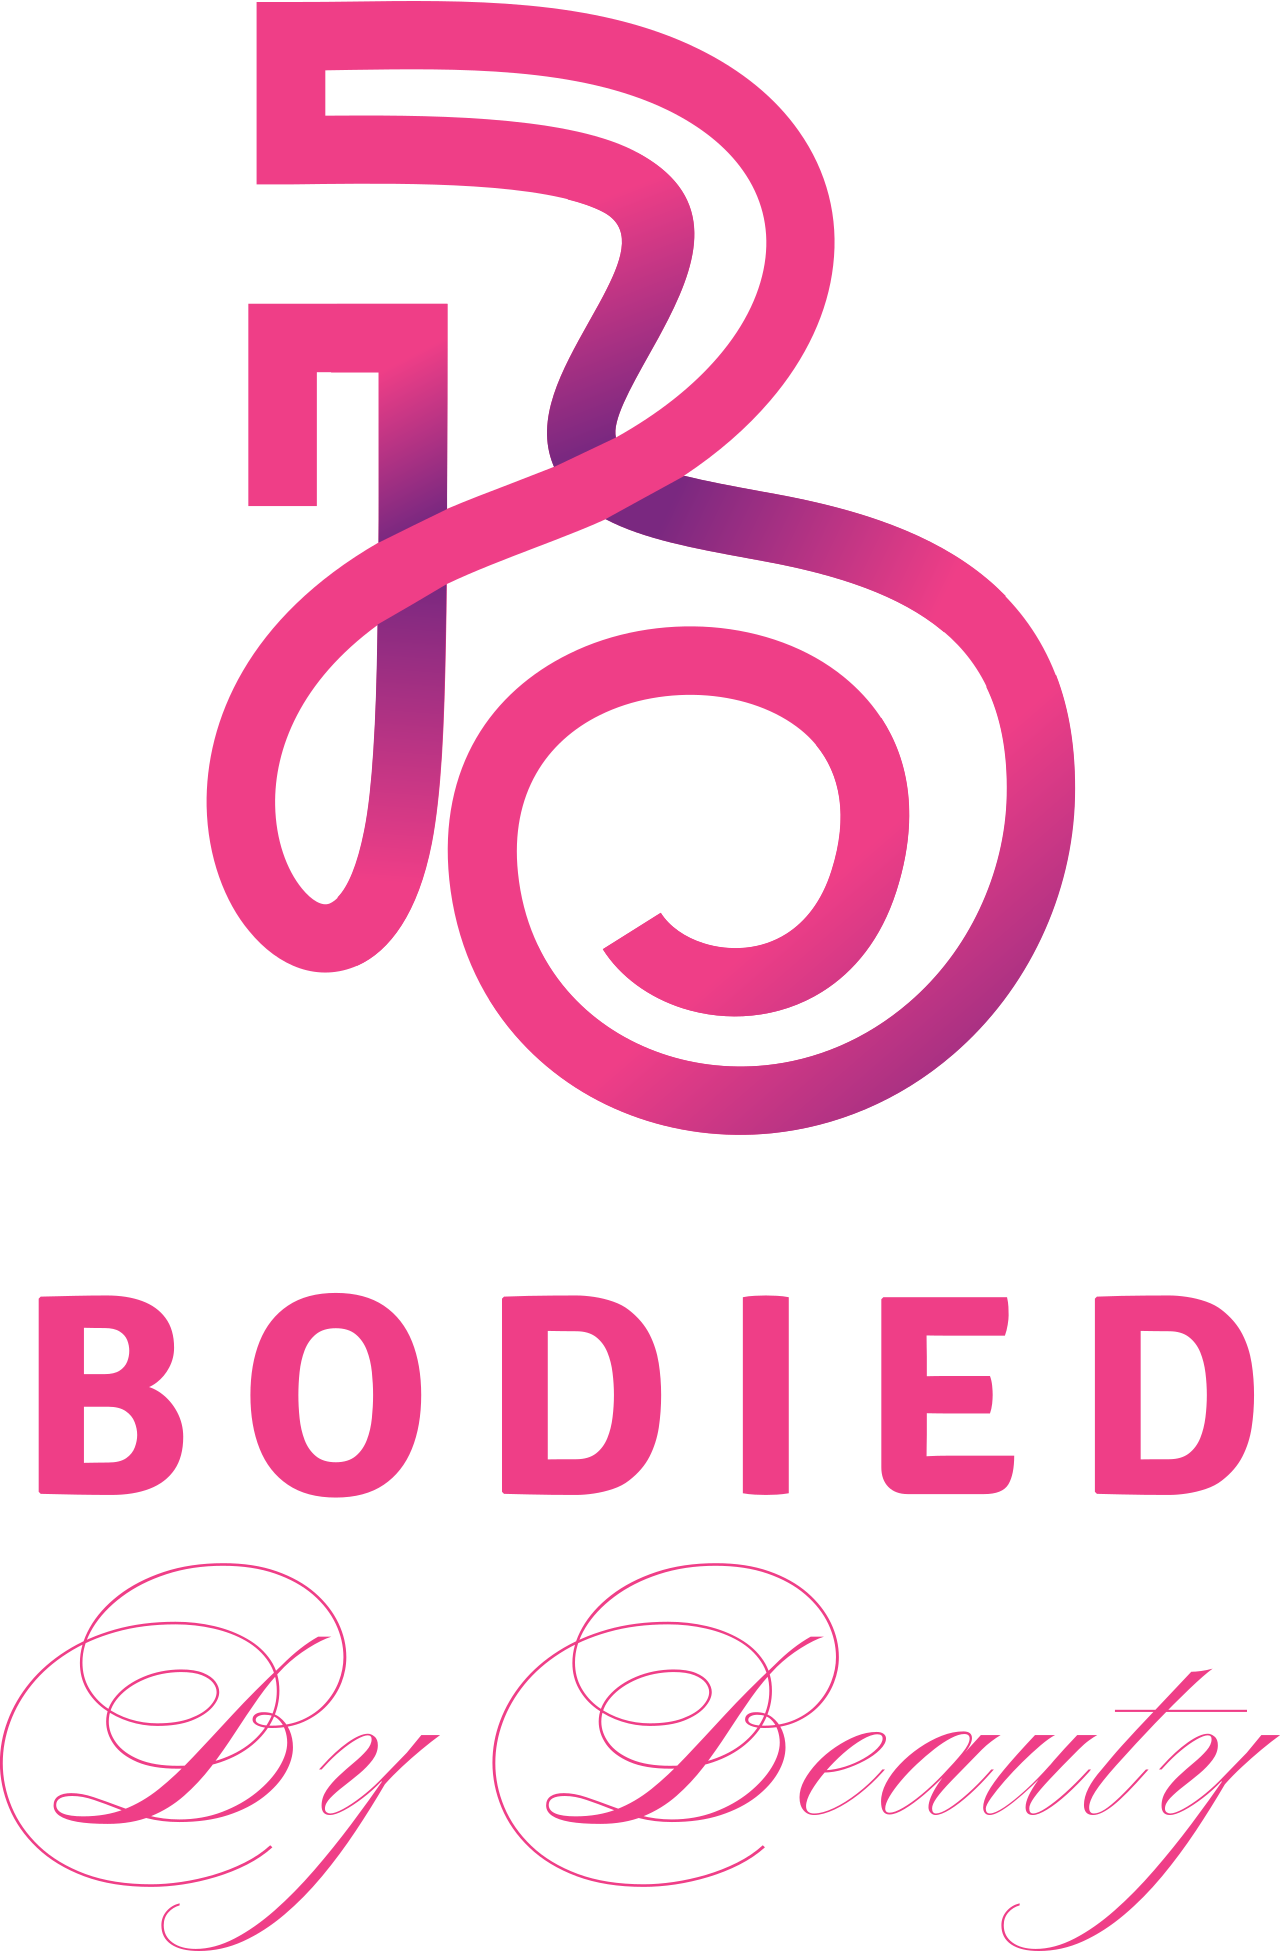 BODIED's web page